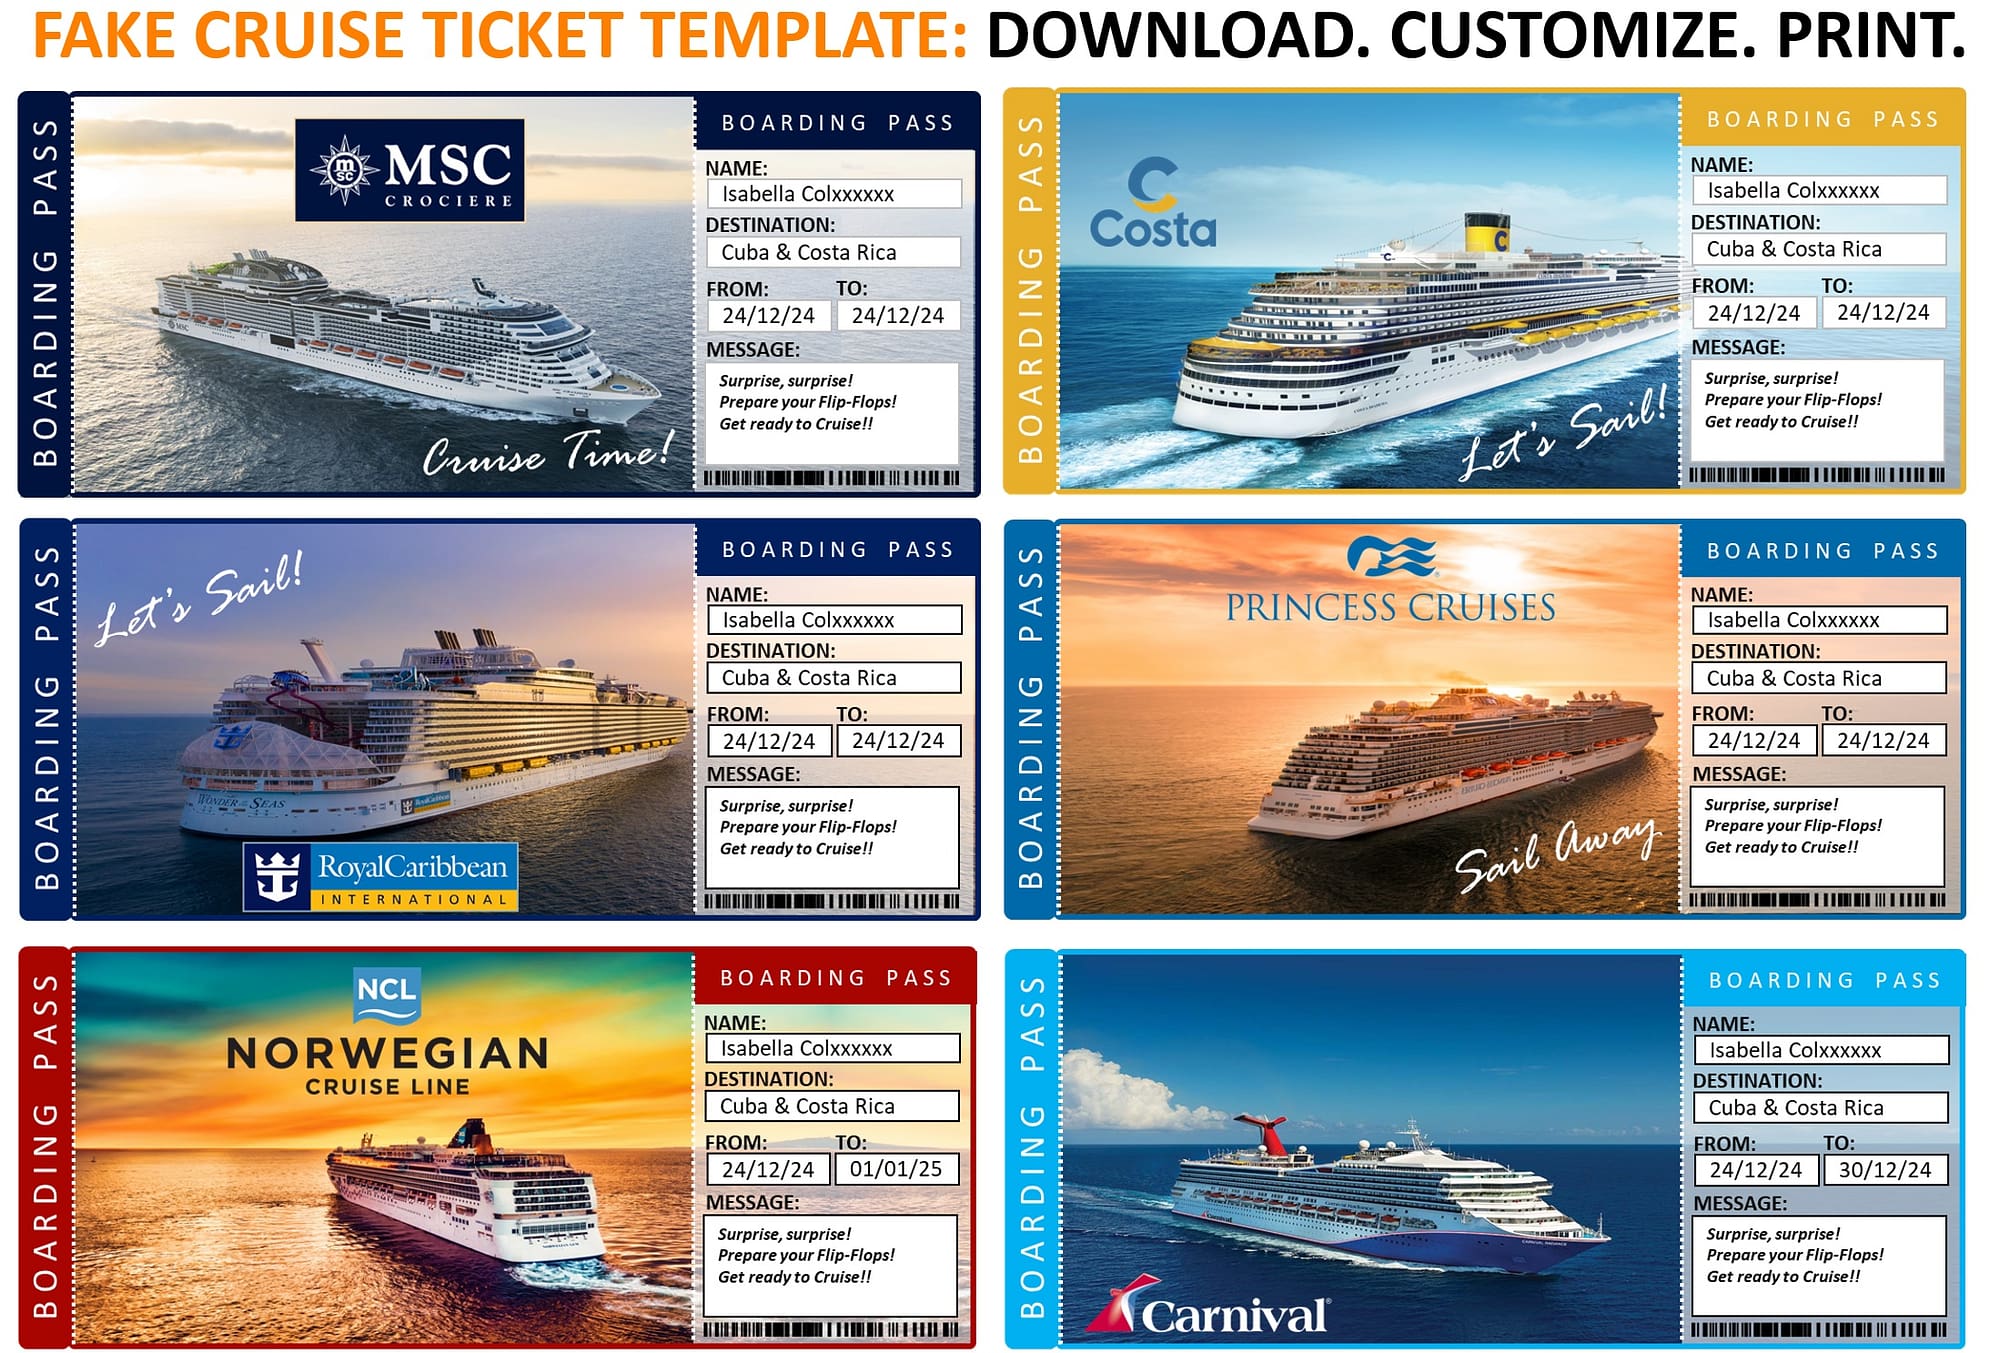 Free Fake Cruise Tickets Boarding Pass Templates for all Companies